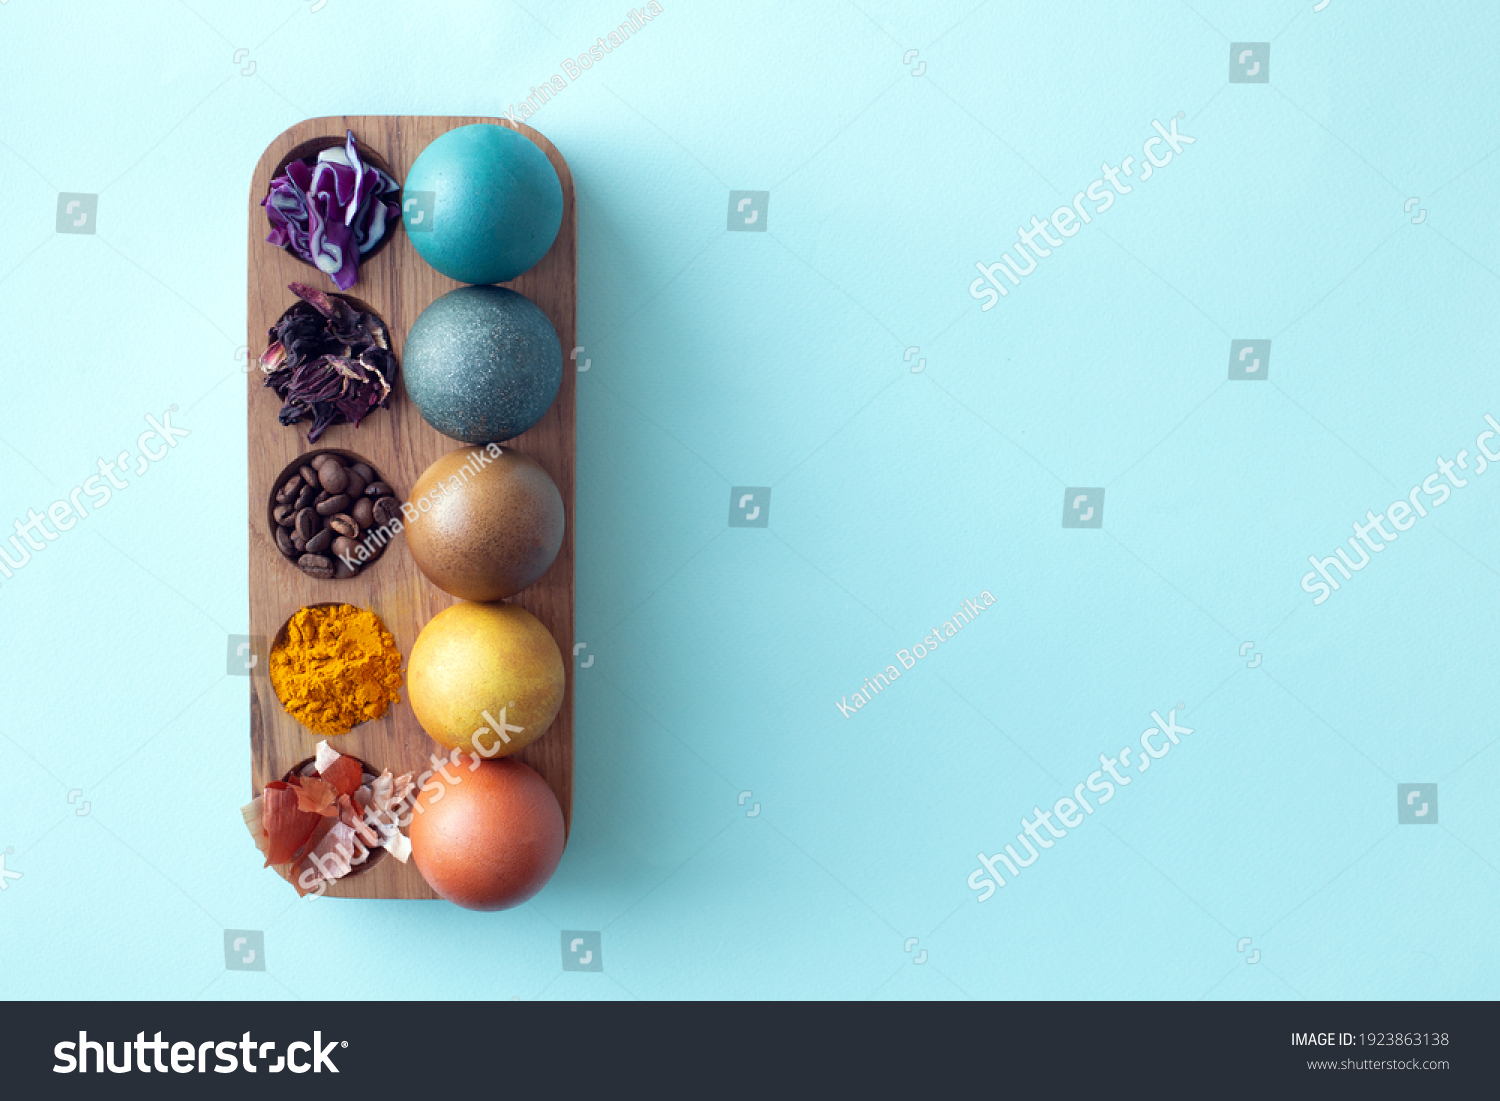 Natural dye for easter eggs - red cabbage, carcade, coffee, turmeric and onion skin on light blue background. Homemade colored easter eggs with ingredients. Copy space, mock up #1923863138